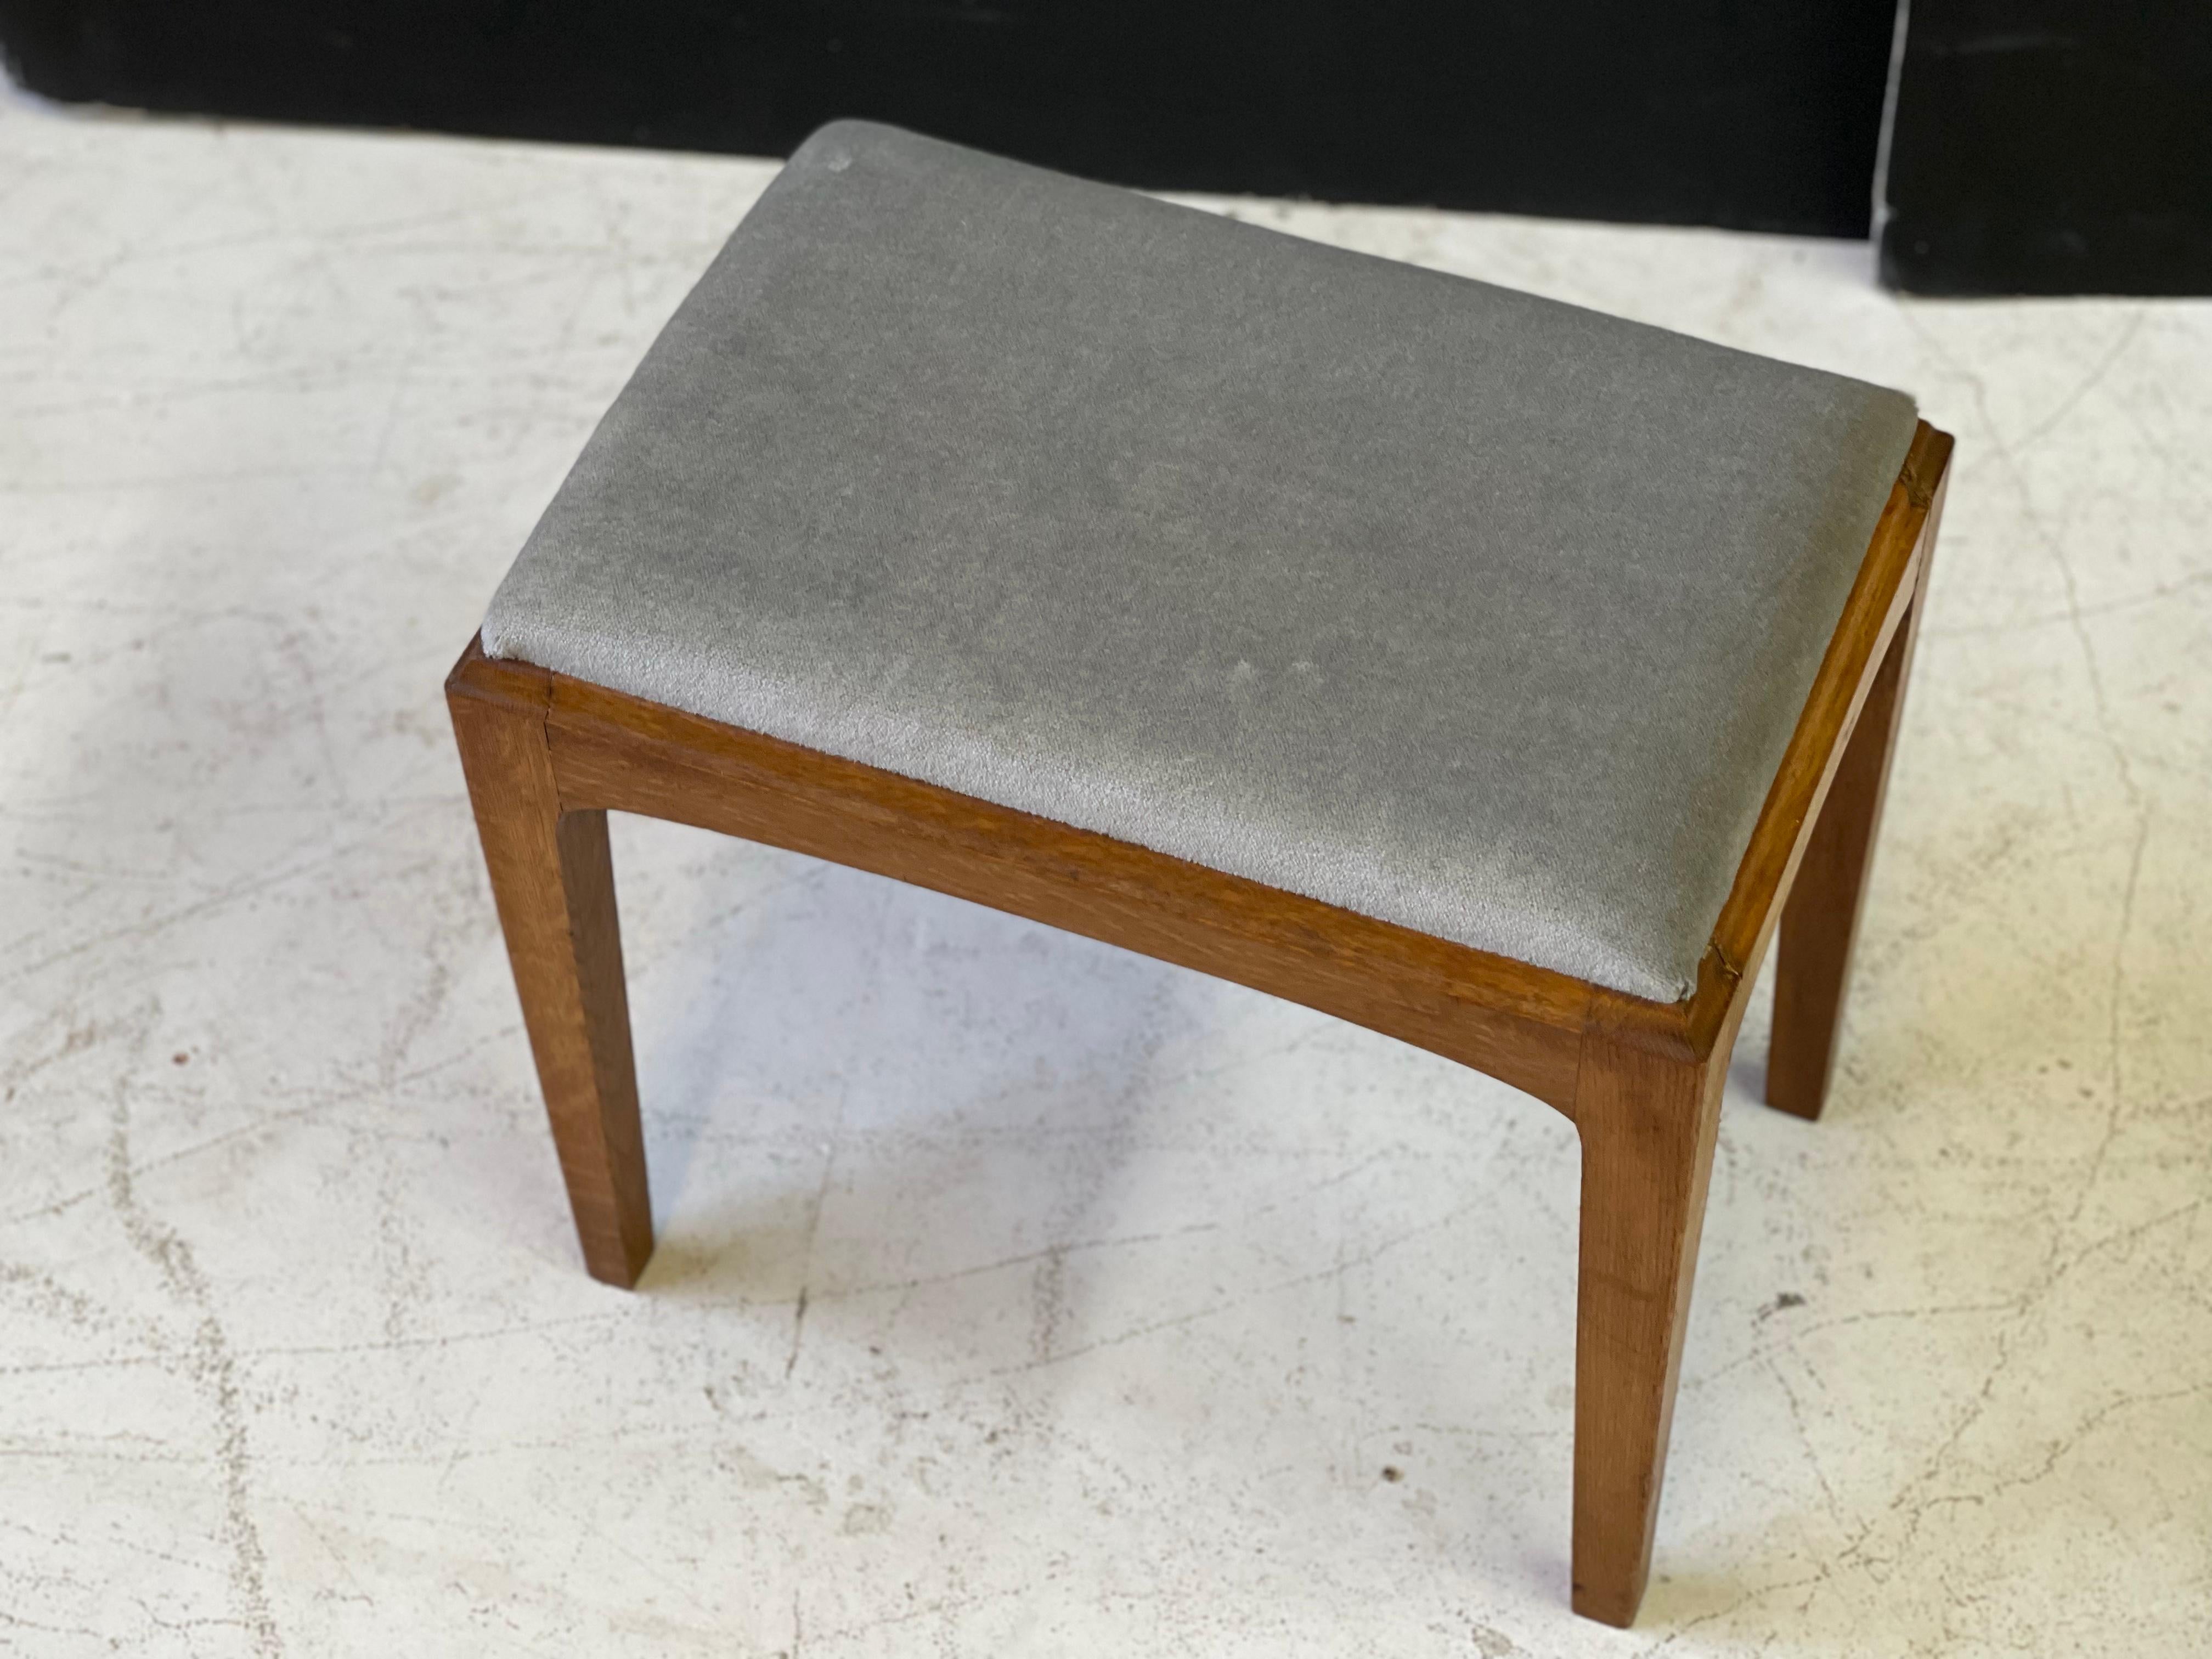 Mid-20th Century English Midcentury Stool by John and Silvia Reid for Stag Furniture